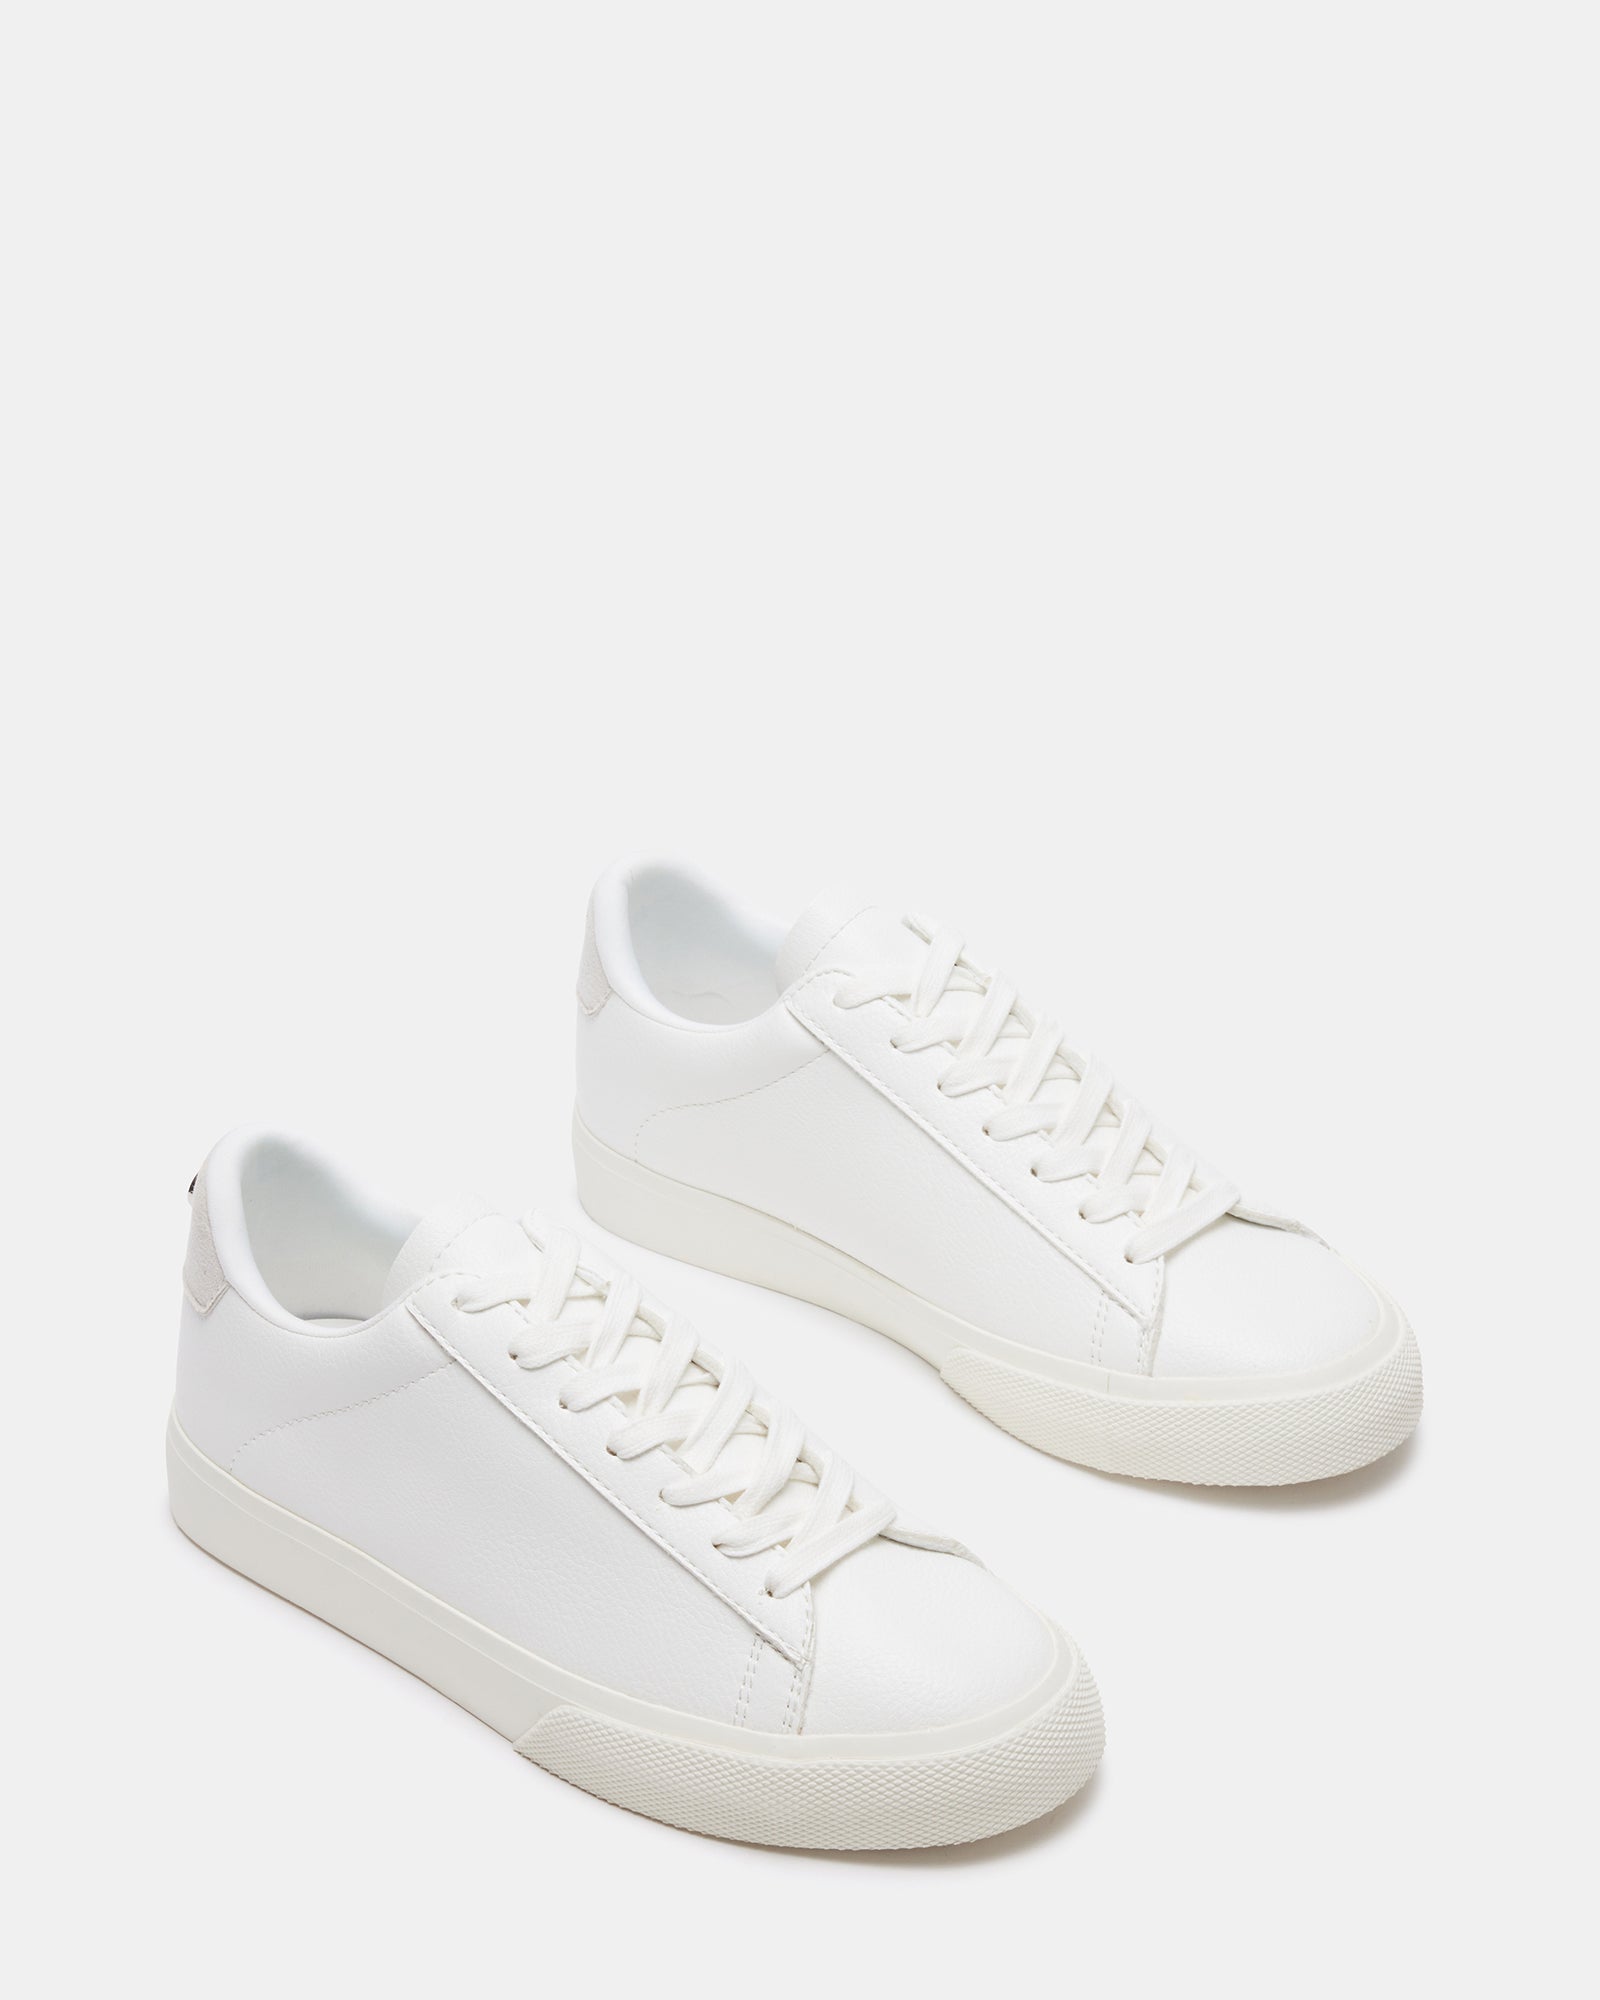 REMI White Low-Top Lace-Up Sneaker | Women's Sneakers – Steve Madden